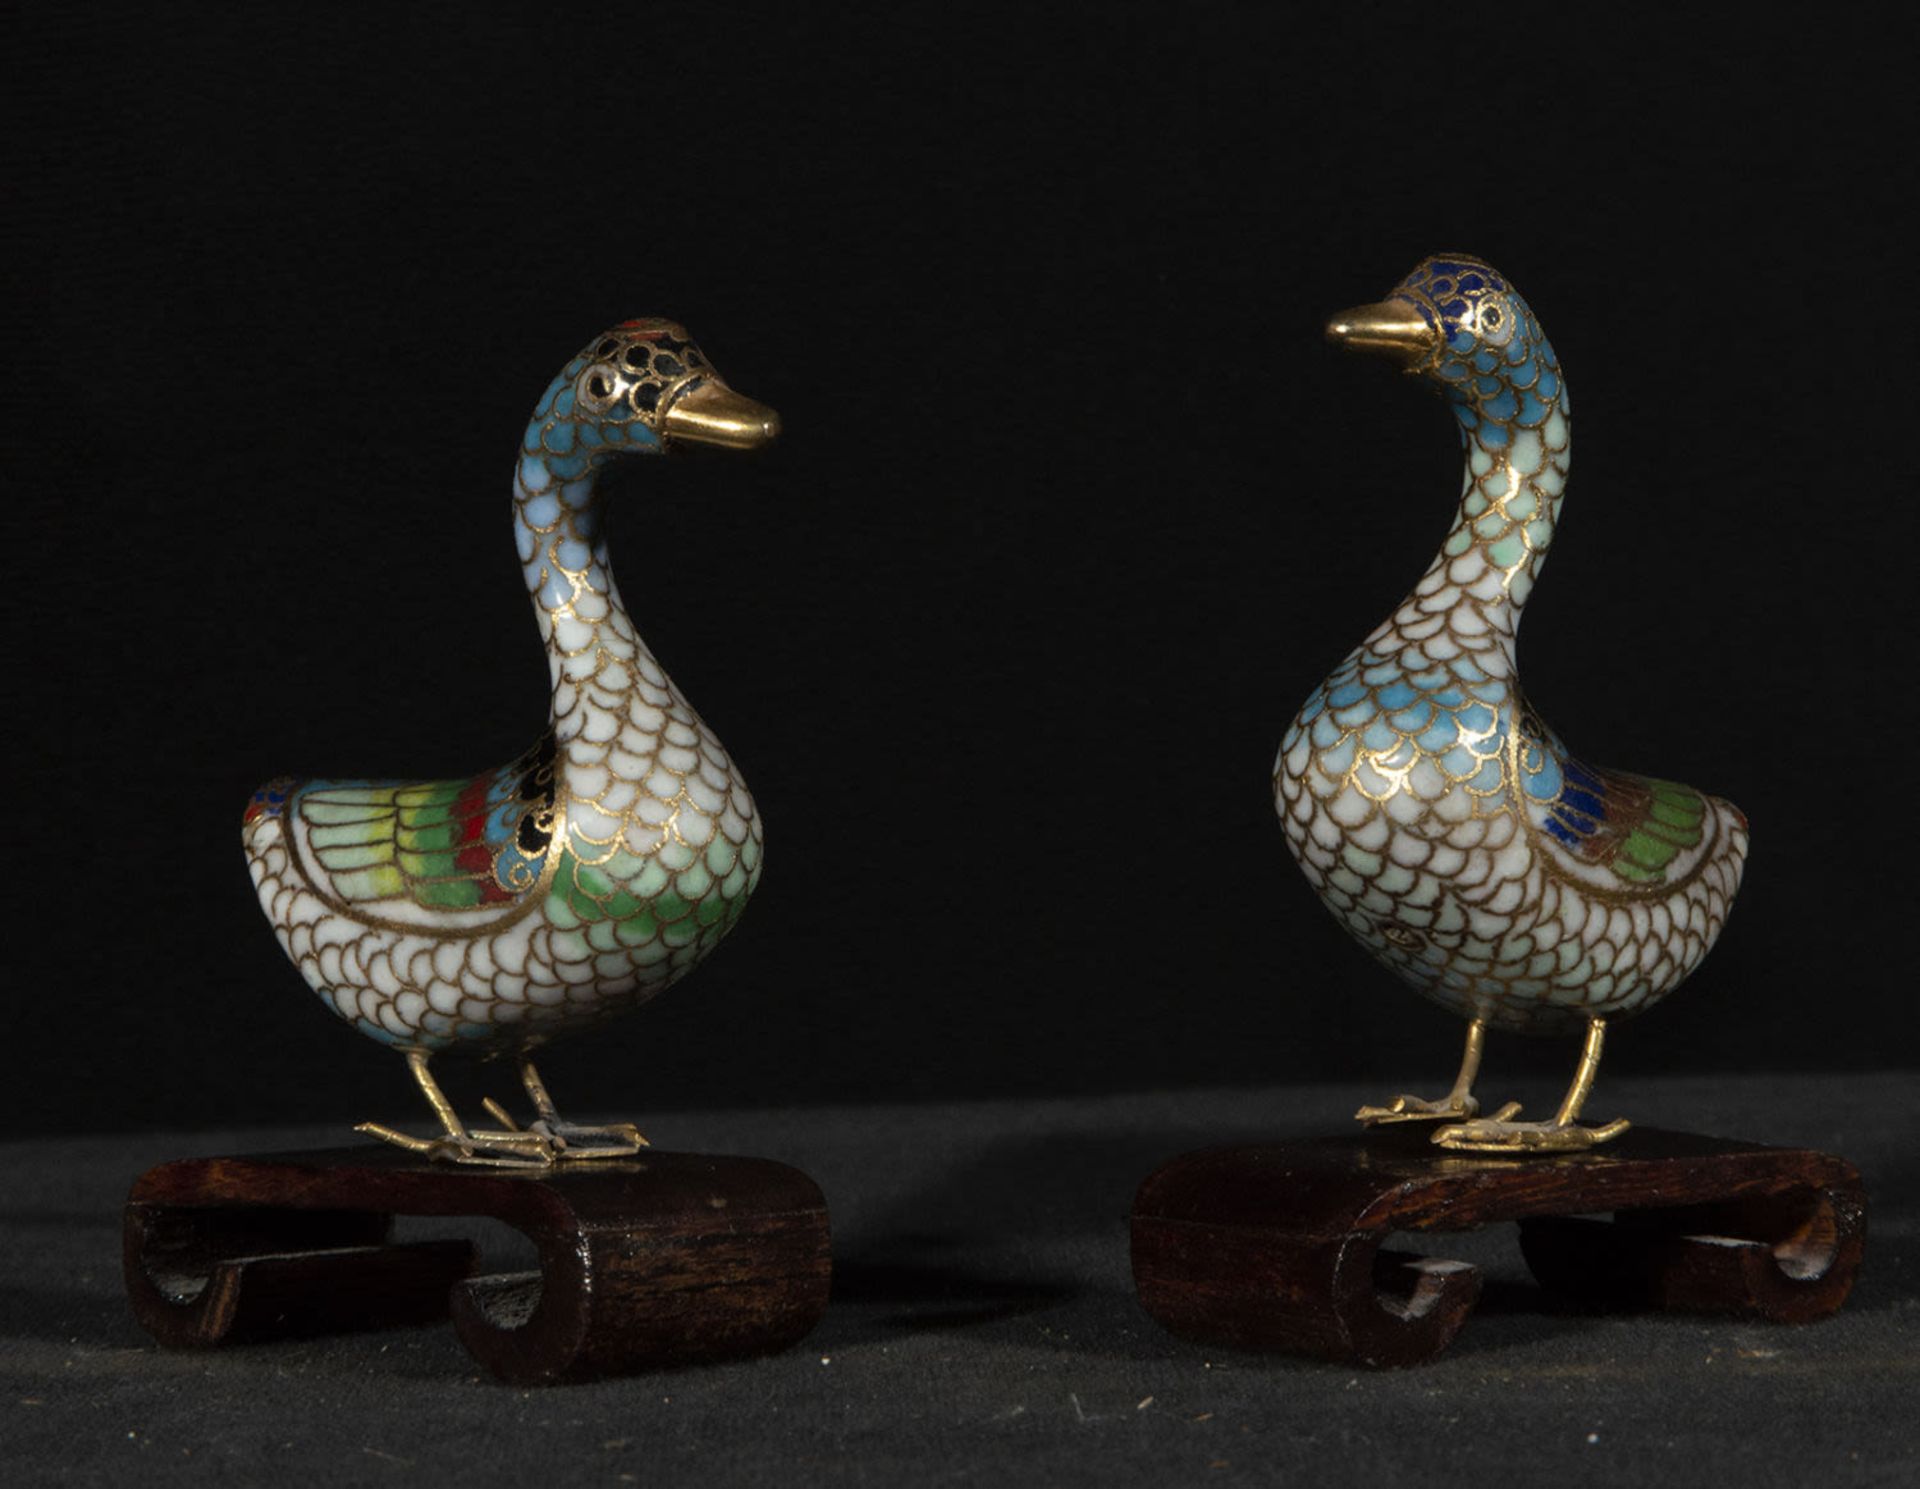 Pair of Chinese ducks in bronze filigree and cloisonné enamel, 20th century